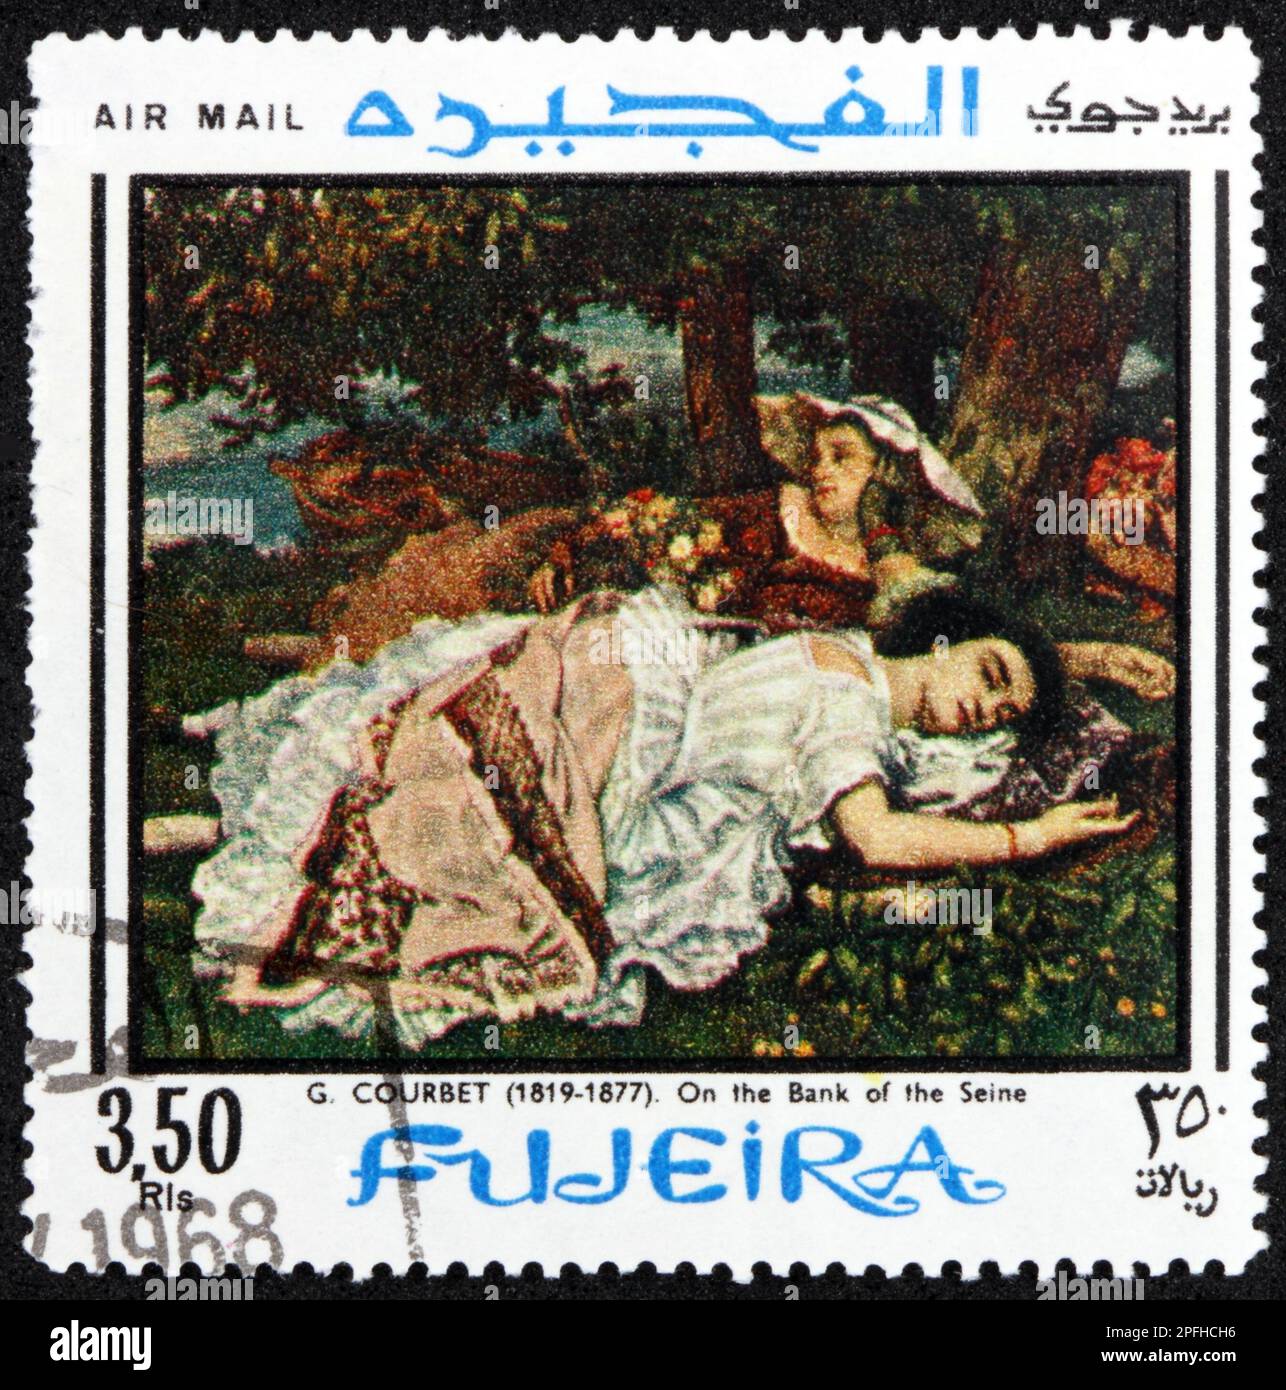 FUJEIRA - CIRCA 1968: a stamp printed in Fujeira shows On the bank of the Seine, painting by Gustave Courbet (1819-1877), French painter, circa 1968 Stock Photo